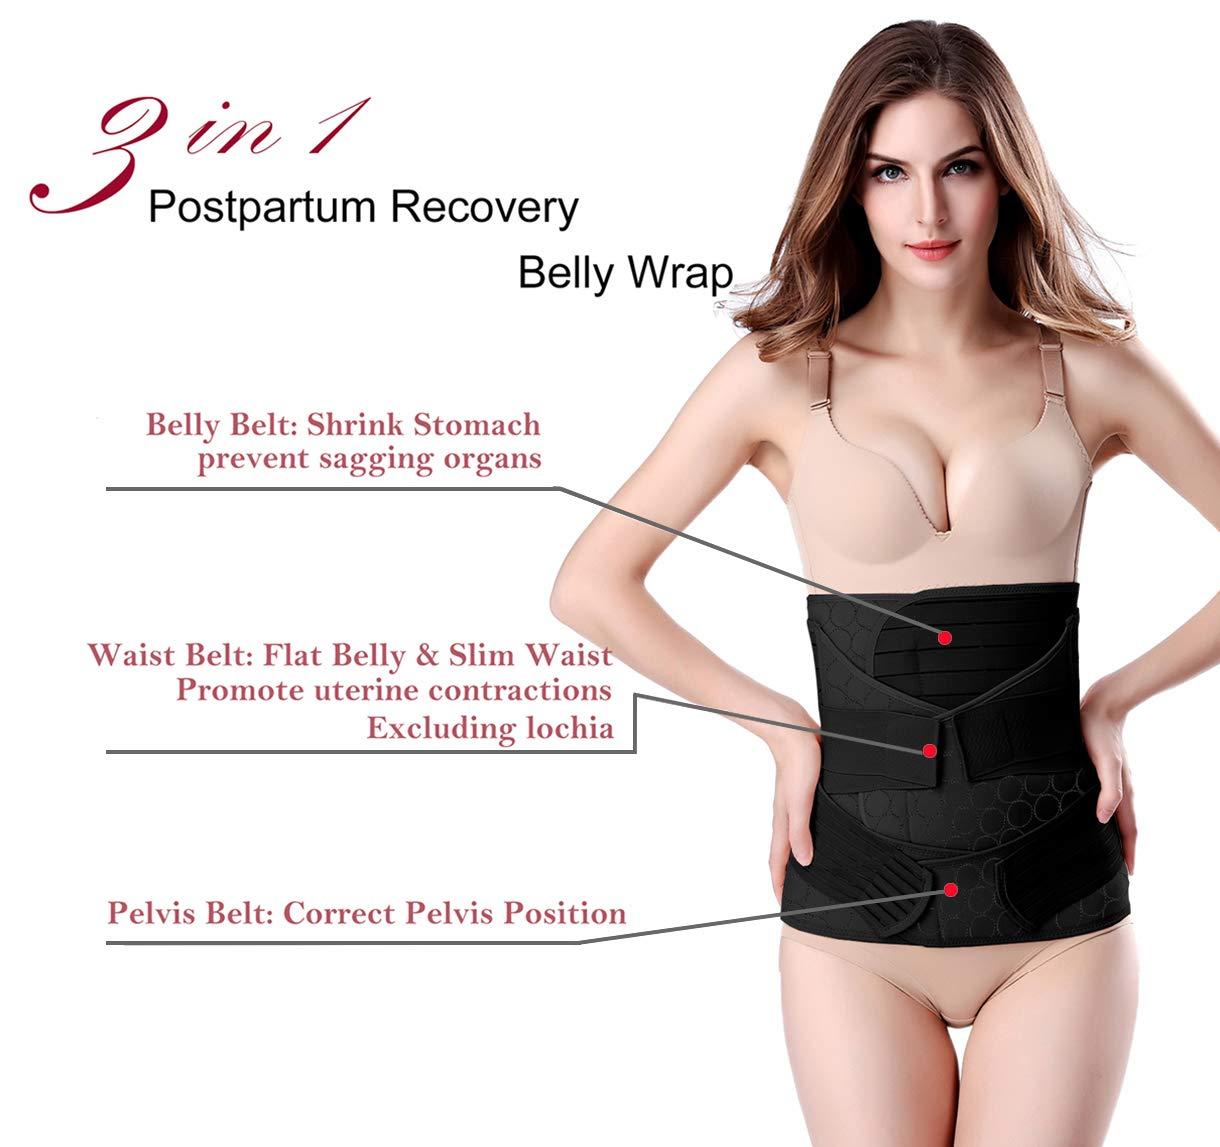  ChongErfei 3 in 1 Postpartum Belly Wrap - Recovery Belly/Waist/Pelvis  Belt Black Postpartum Belly Band,Black L/One Size : Health & Household